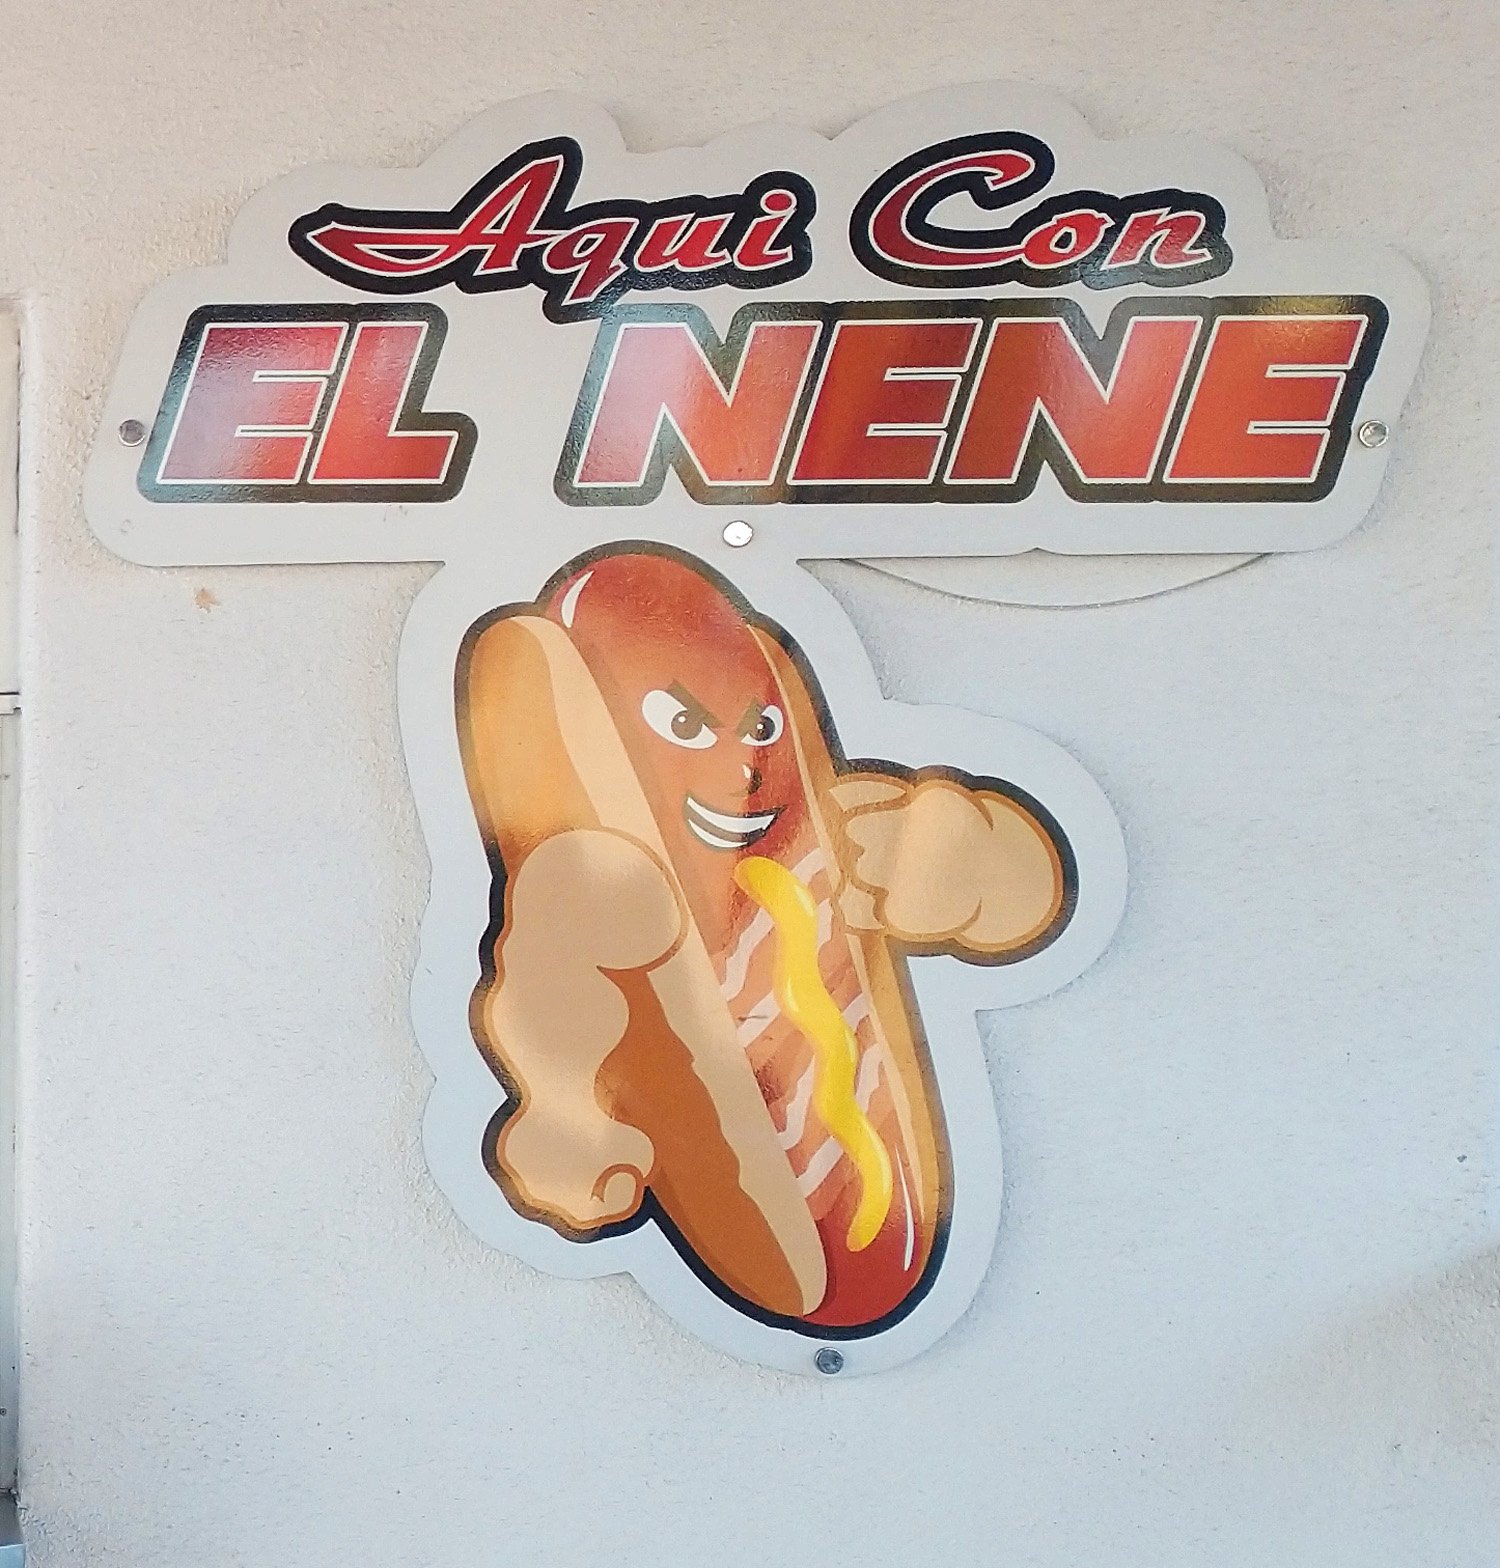 Went to this place one day for some Sonoran Hot Dogs.